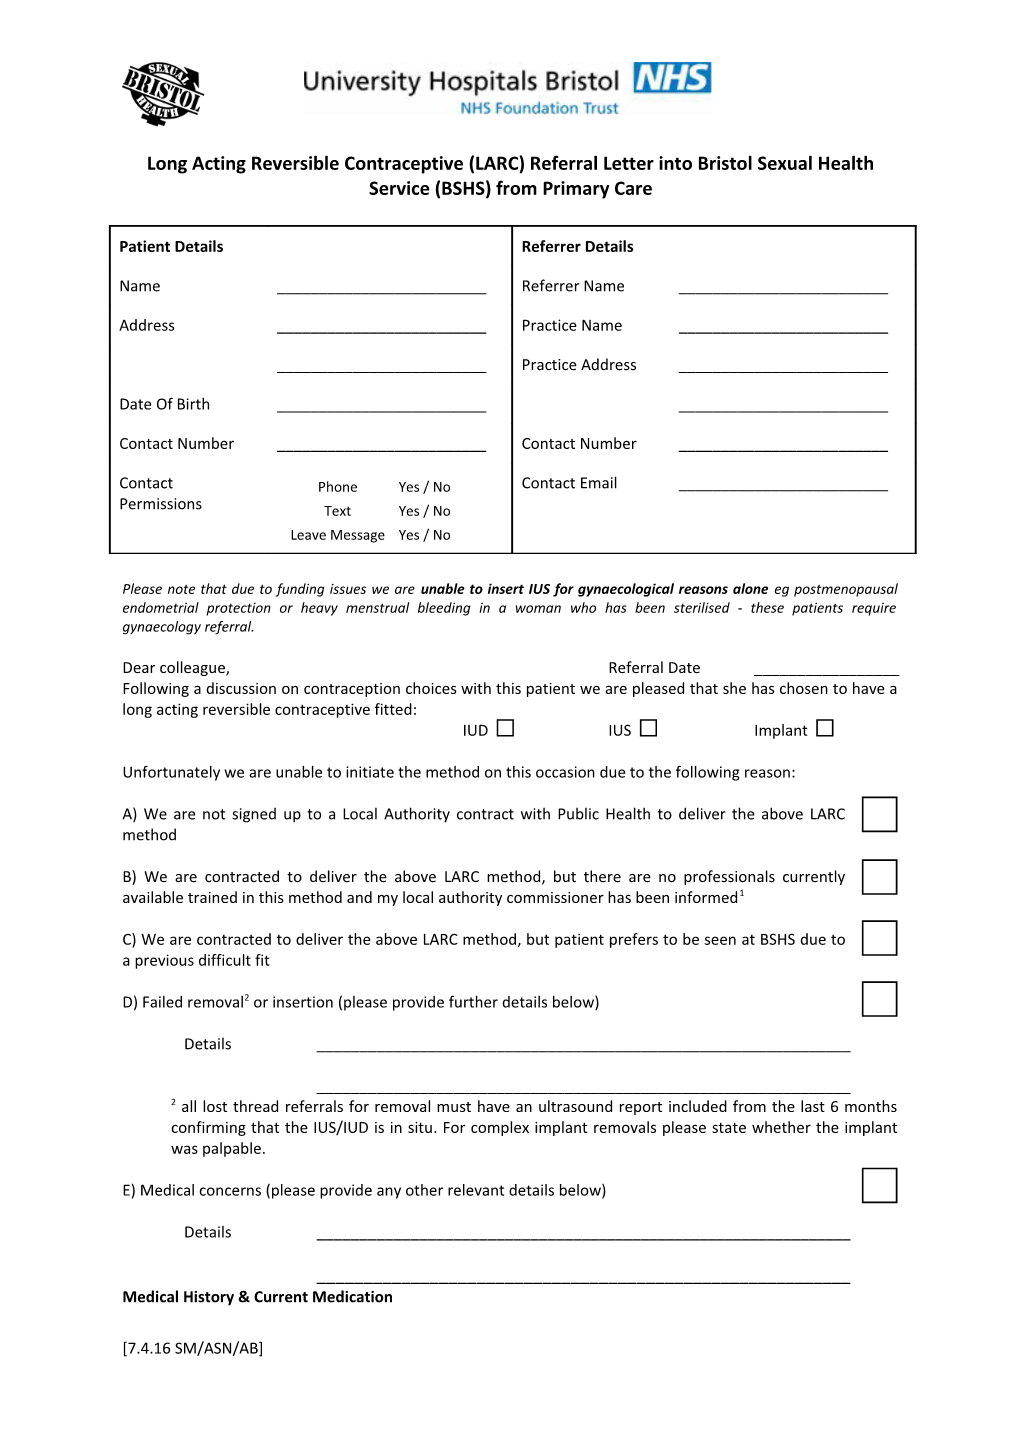 Long Acting Reversible Contraceptive Referral Letter